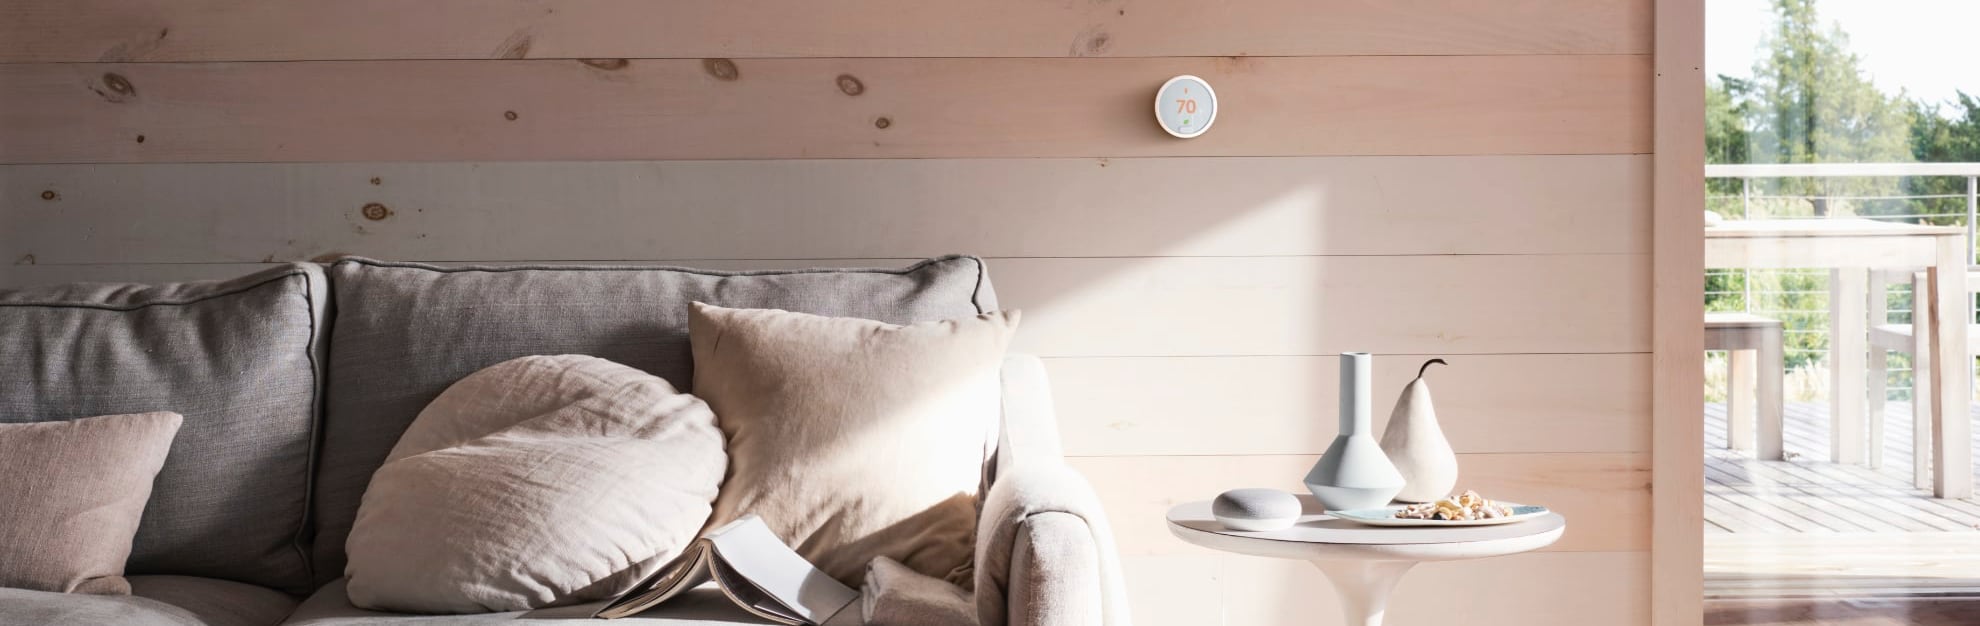 Vivint Home Automation in Baton Rouge